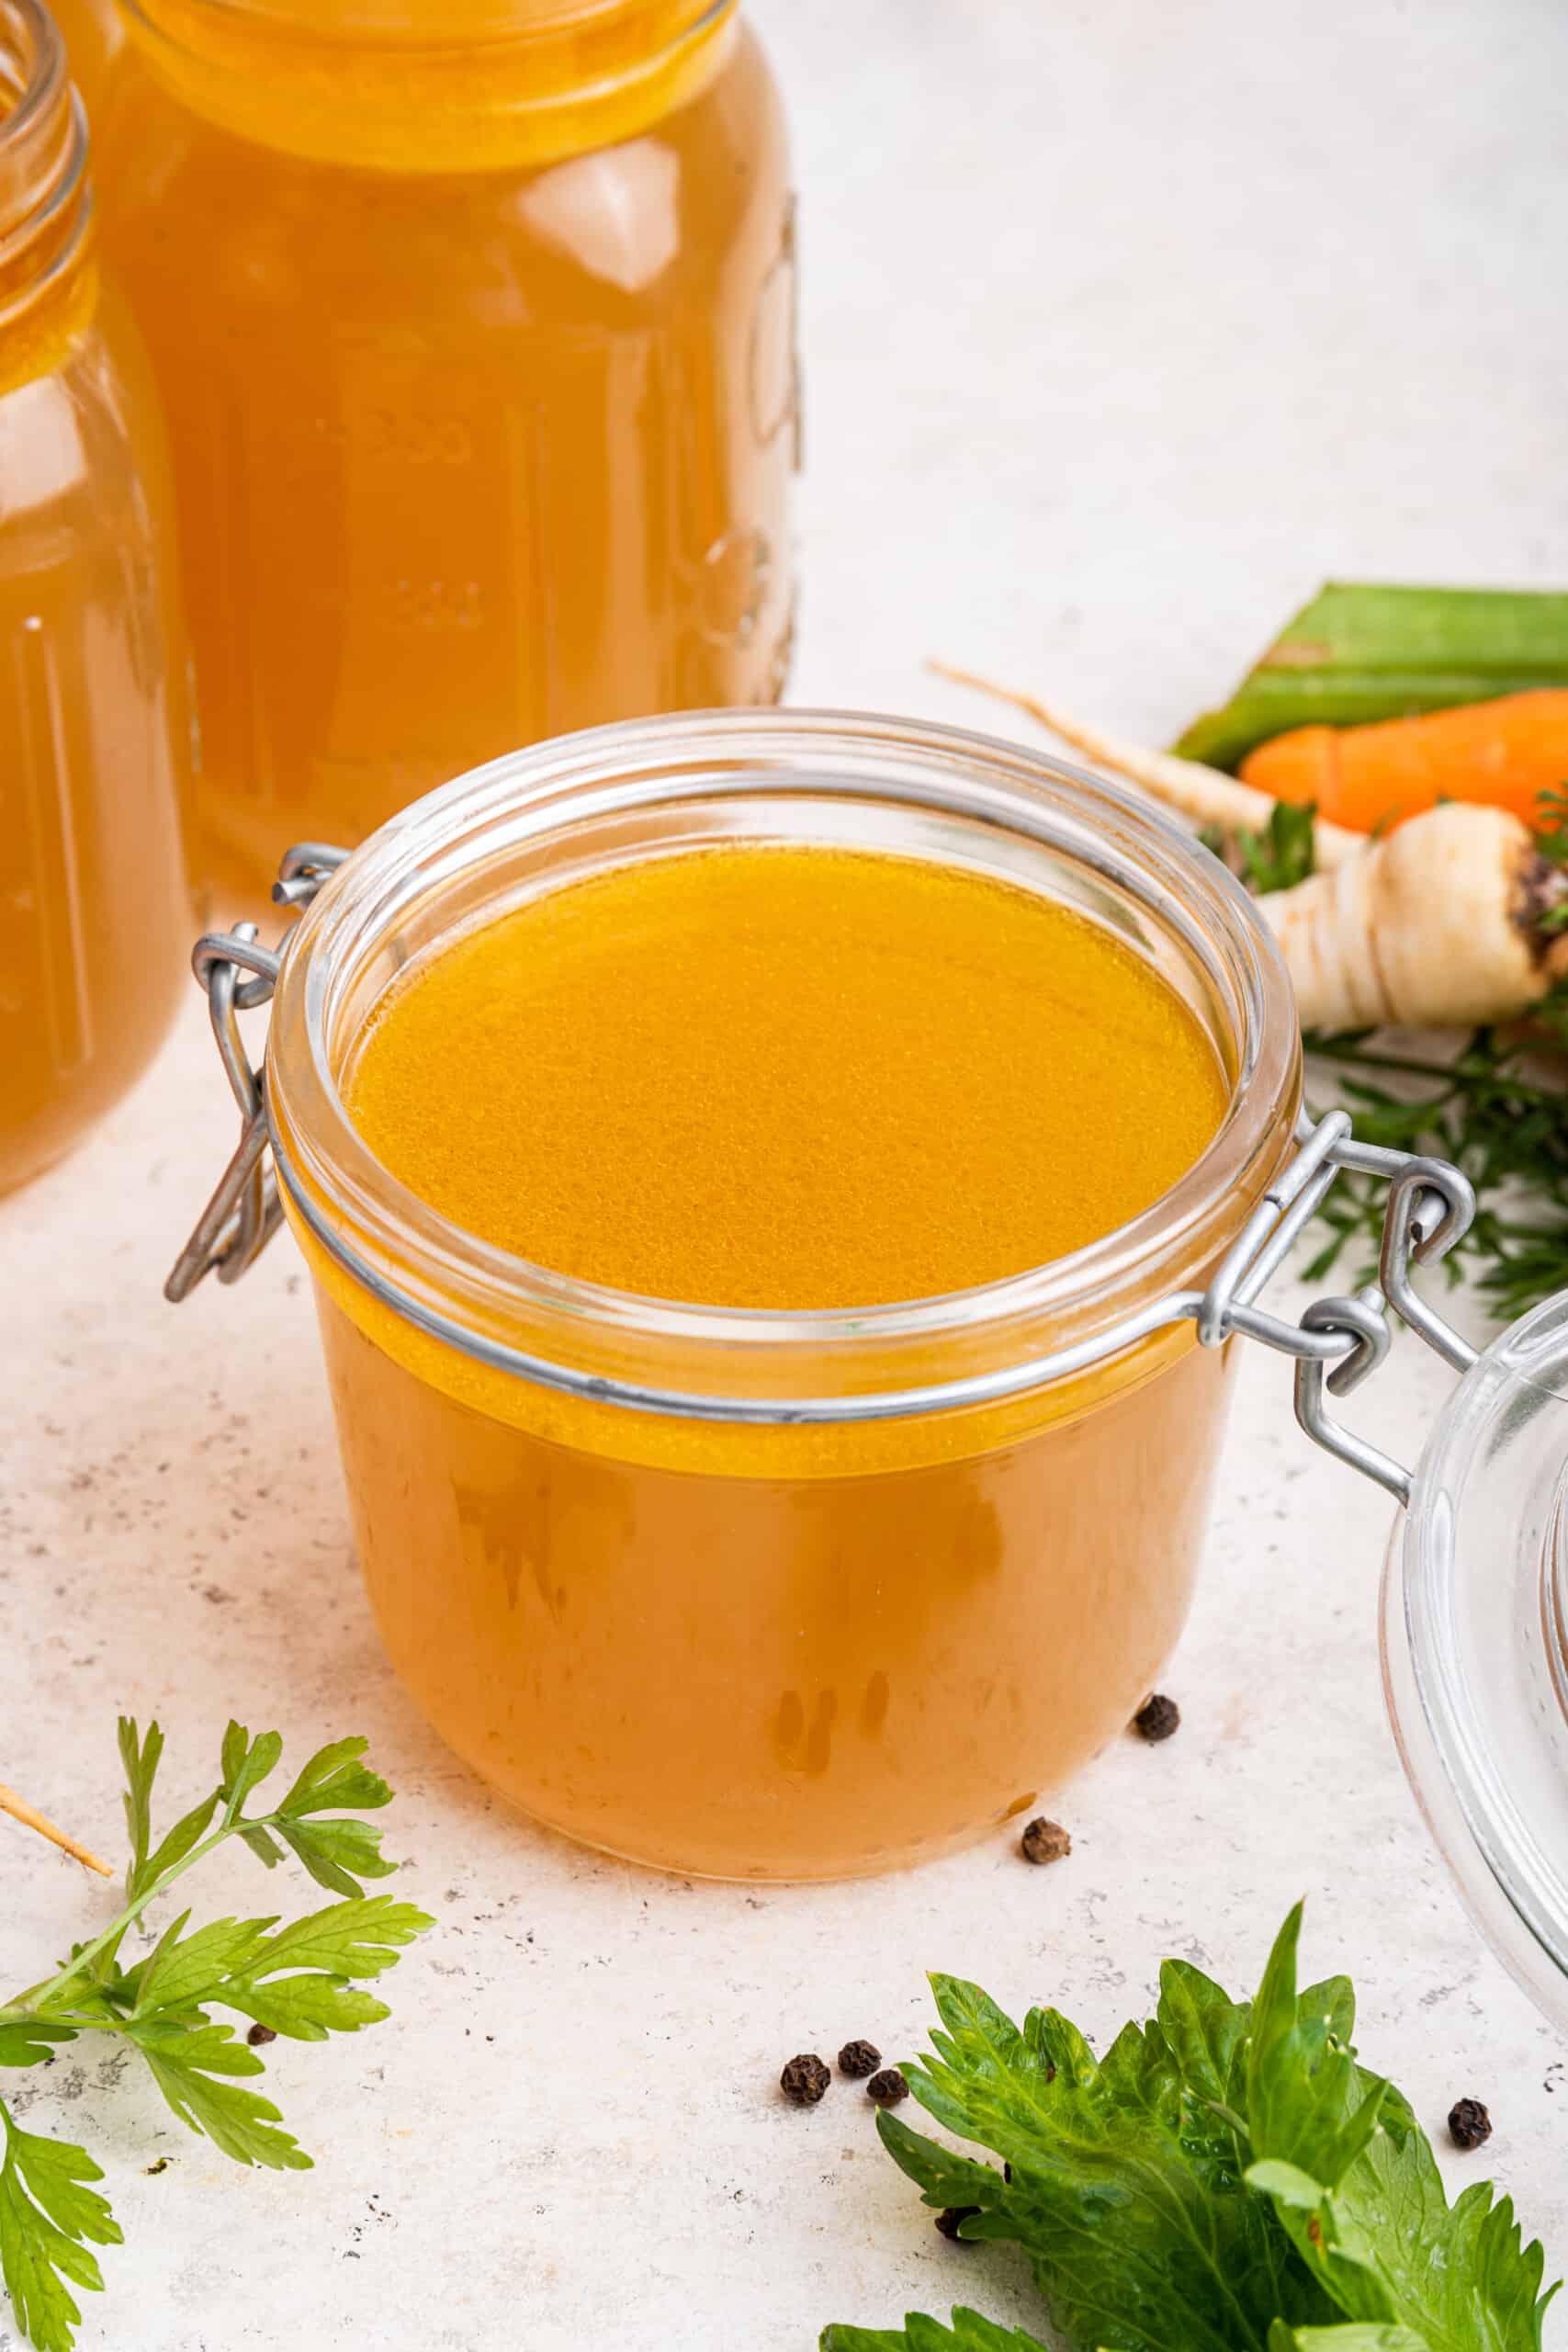 Jar of Instant Pot chicken bone broth with additional jars and vegetables in background